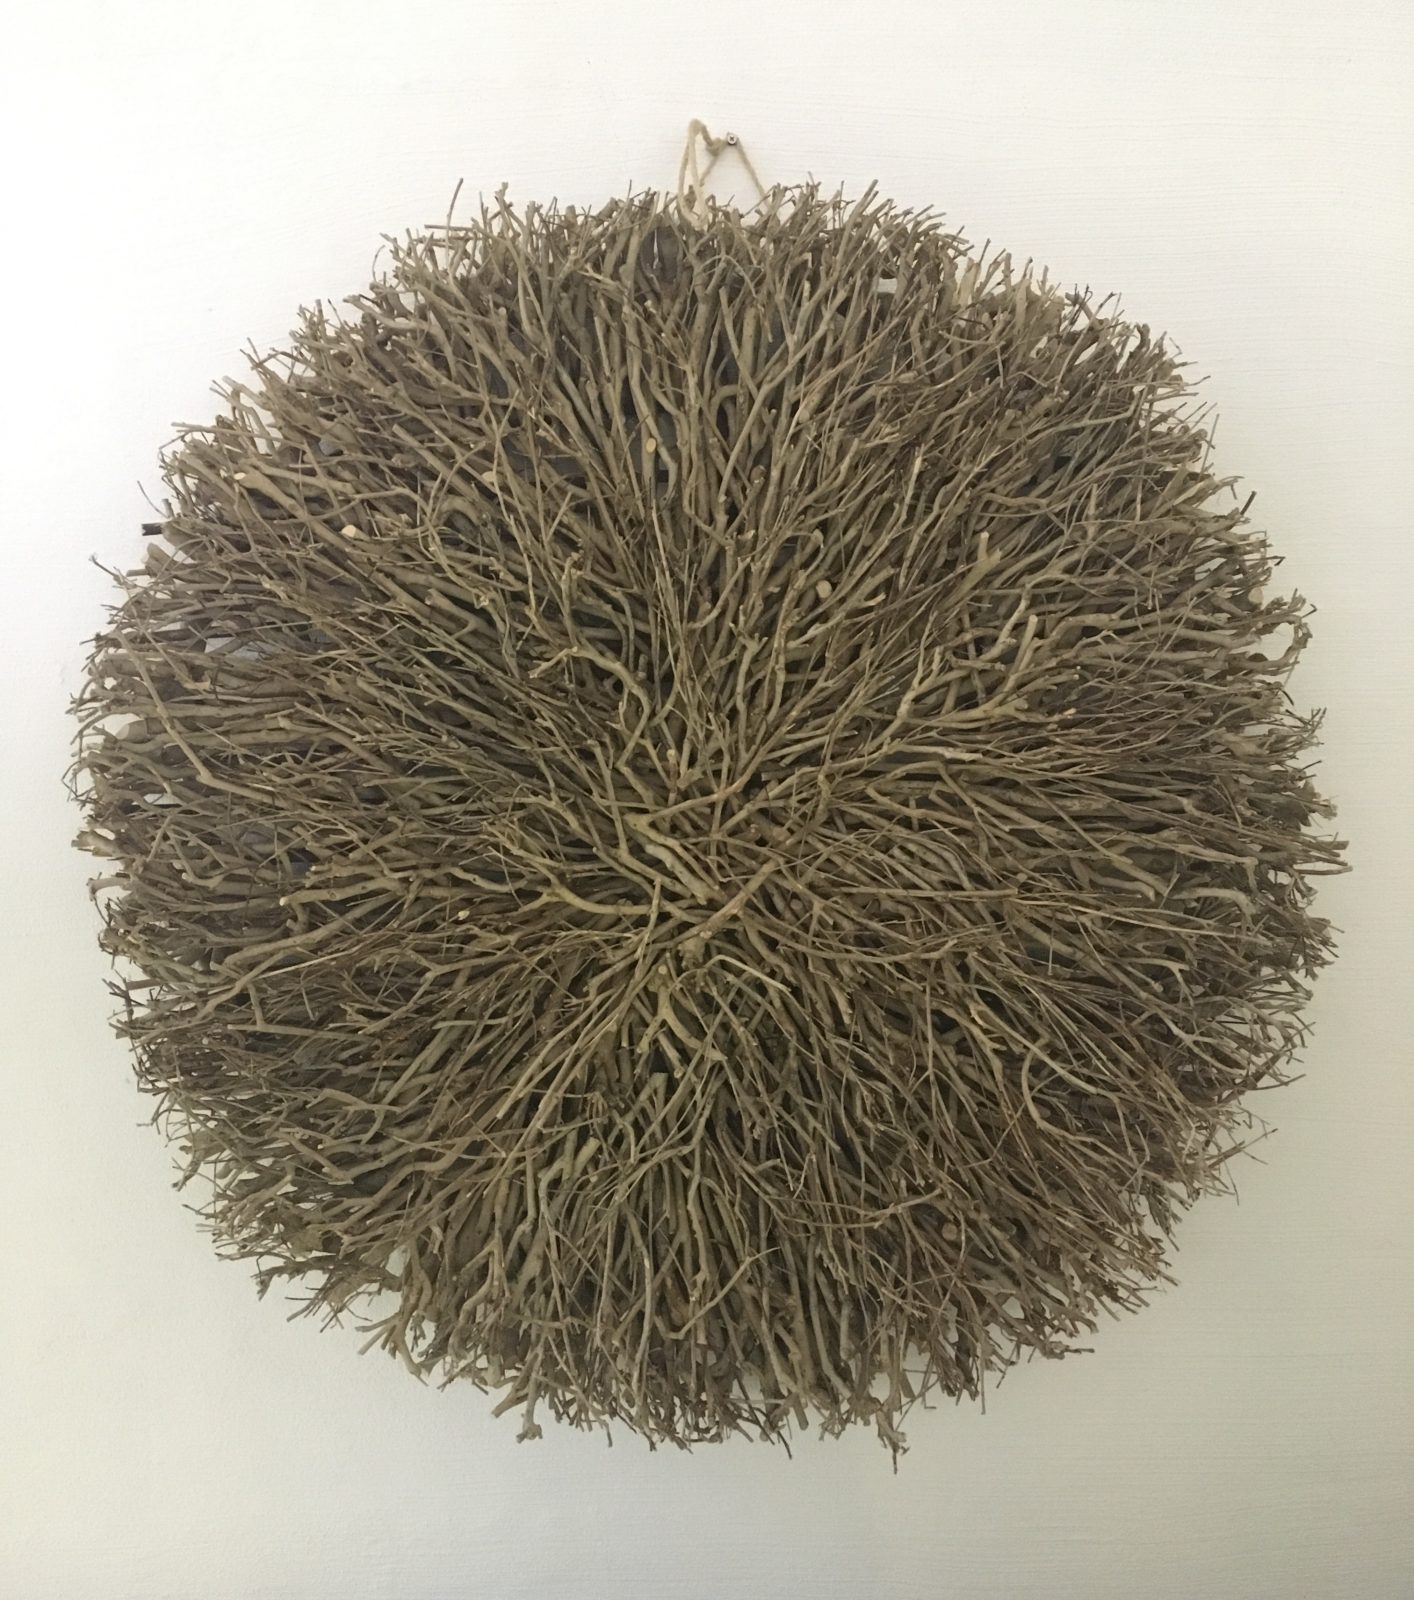  WALL  DECOR  TWIG LARGE ROUND  NATURAL Daydream Leisure 